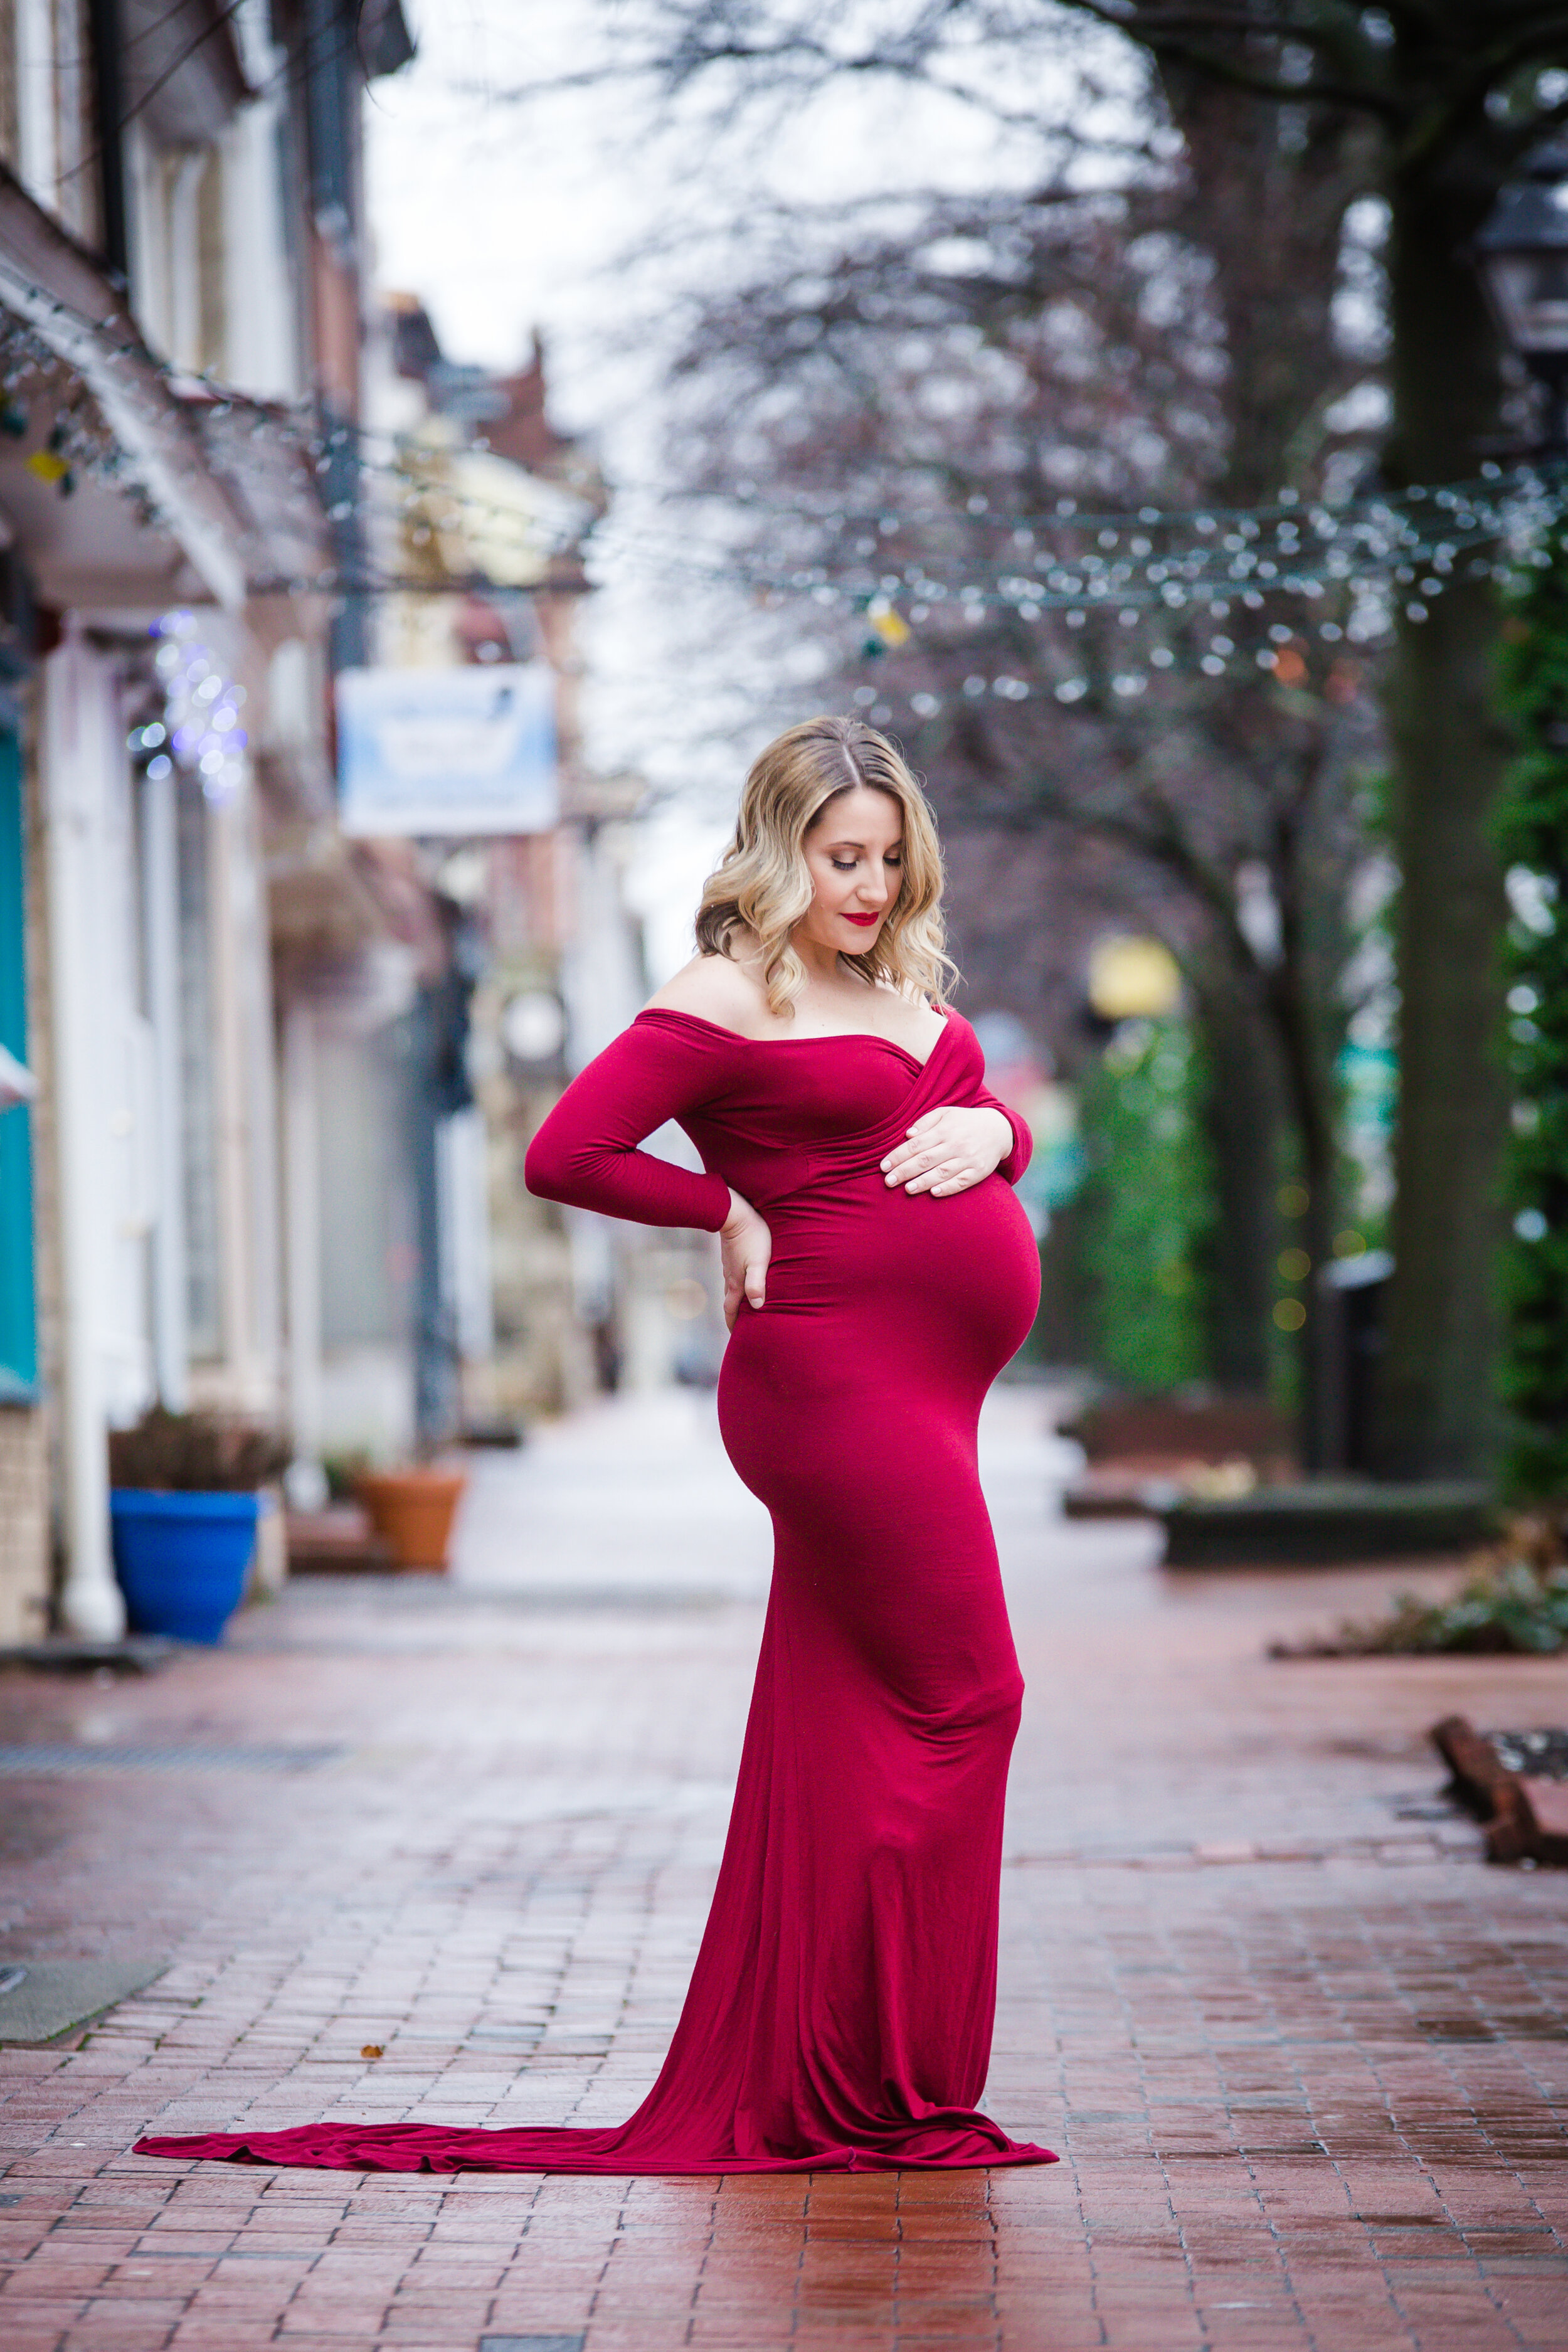 out-front-of-studio-maternity-photo-red-brick.jpg